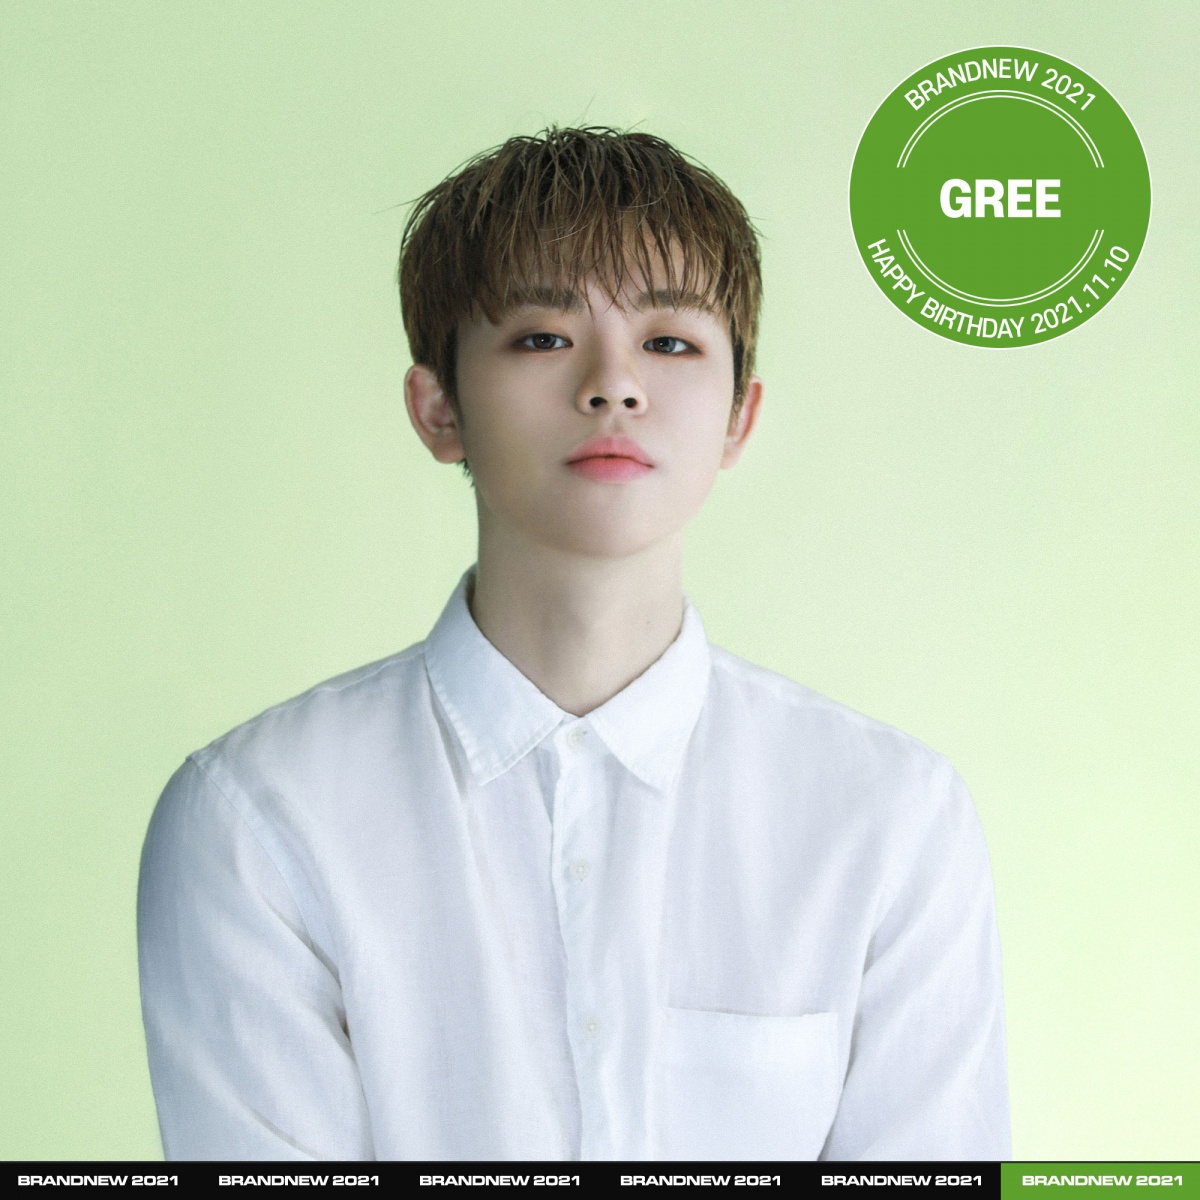 GREE releases new album 'HI, TEEN' on the 12th... Featuring Yerin from GFRIEND